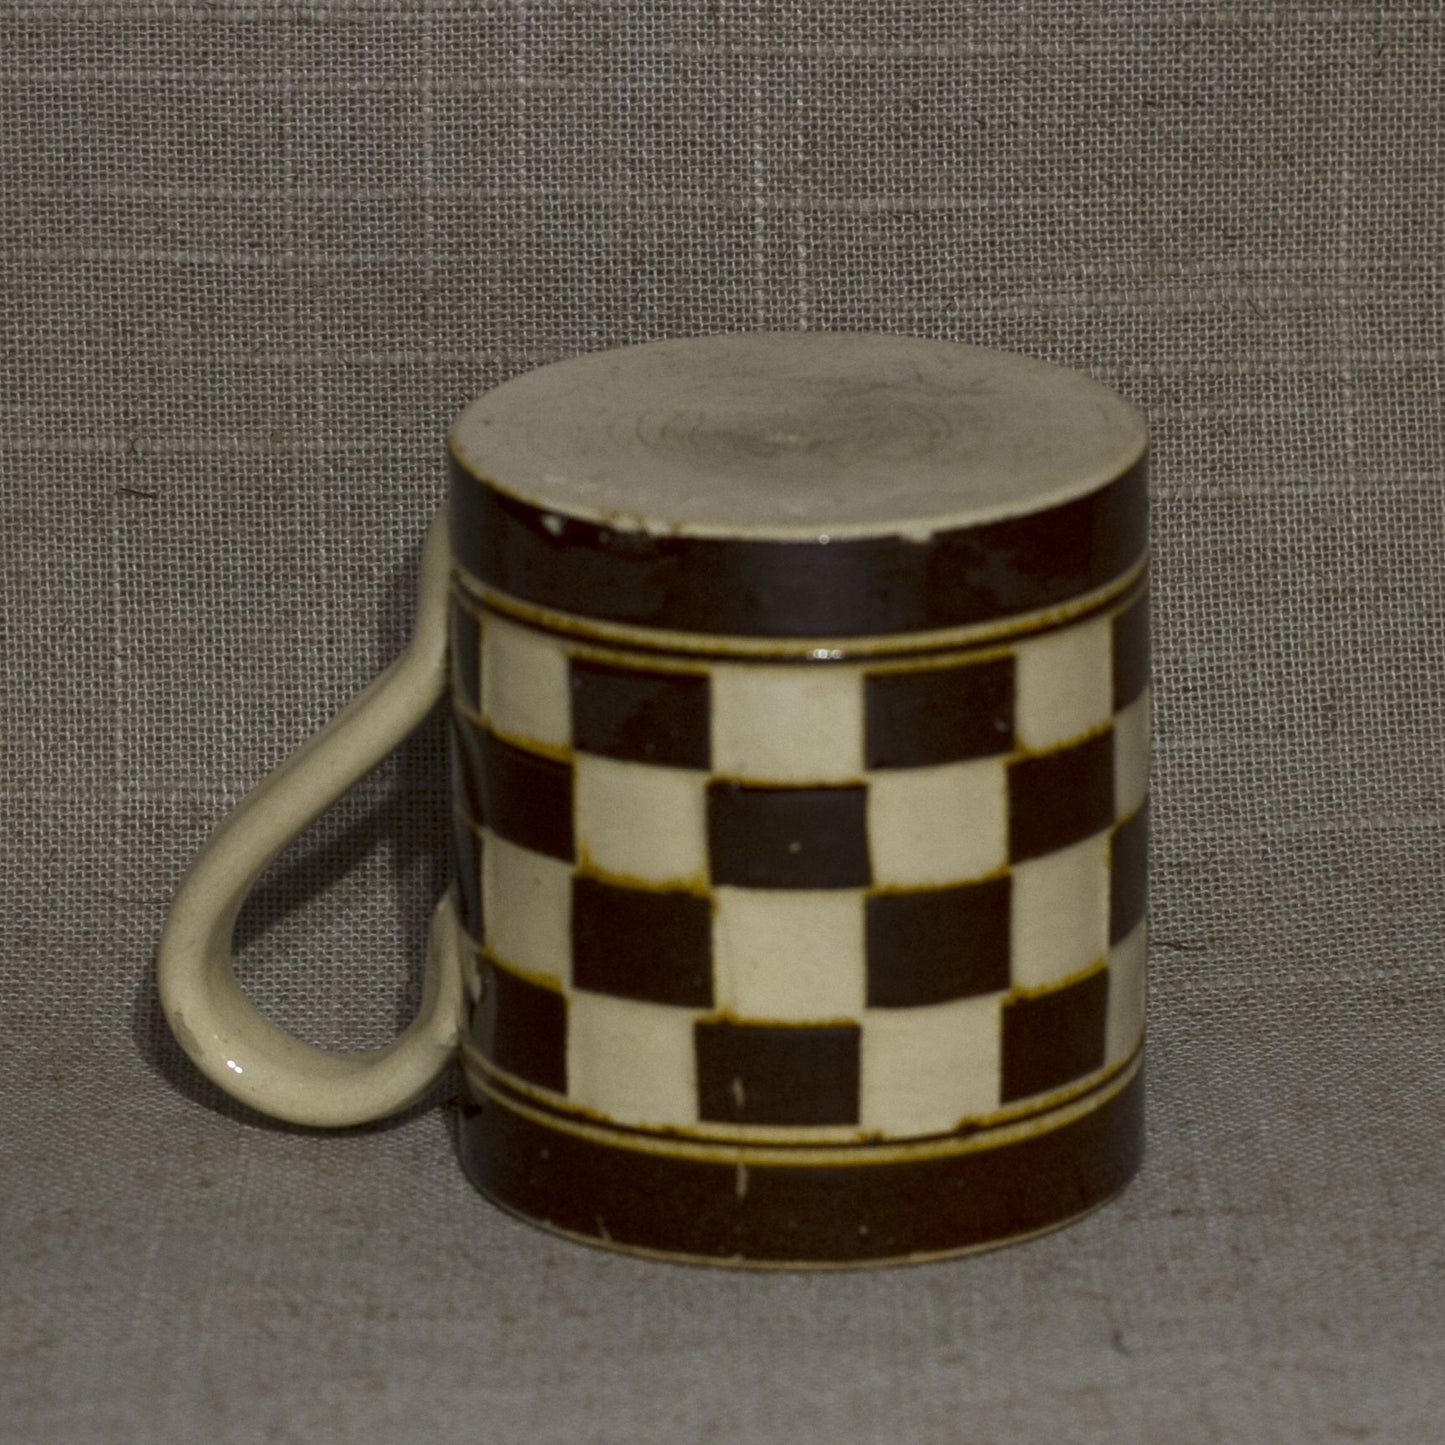 Antique MOCHA WARE Mug Checkerboard Pattern in Ivory and Chocolate Brown Marked AUSTRIA 00 Circa Early 19th Century